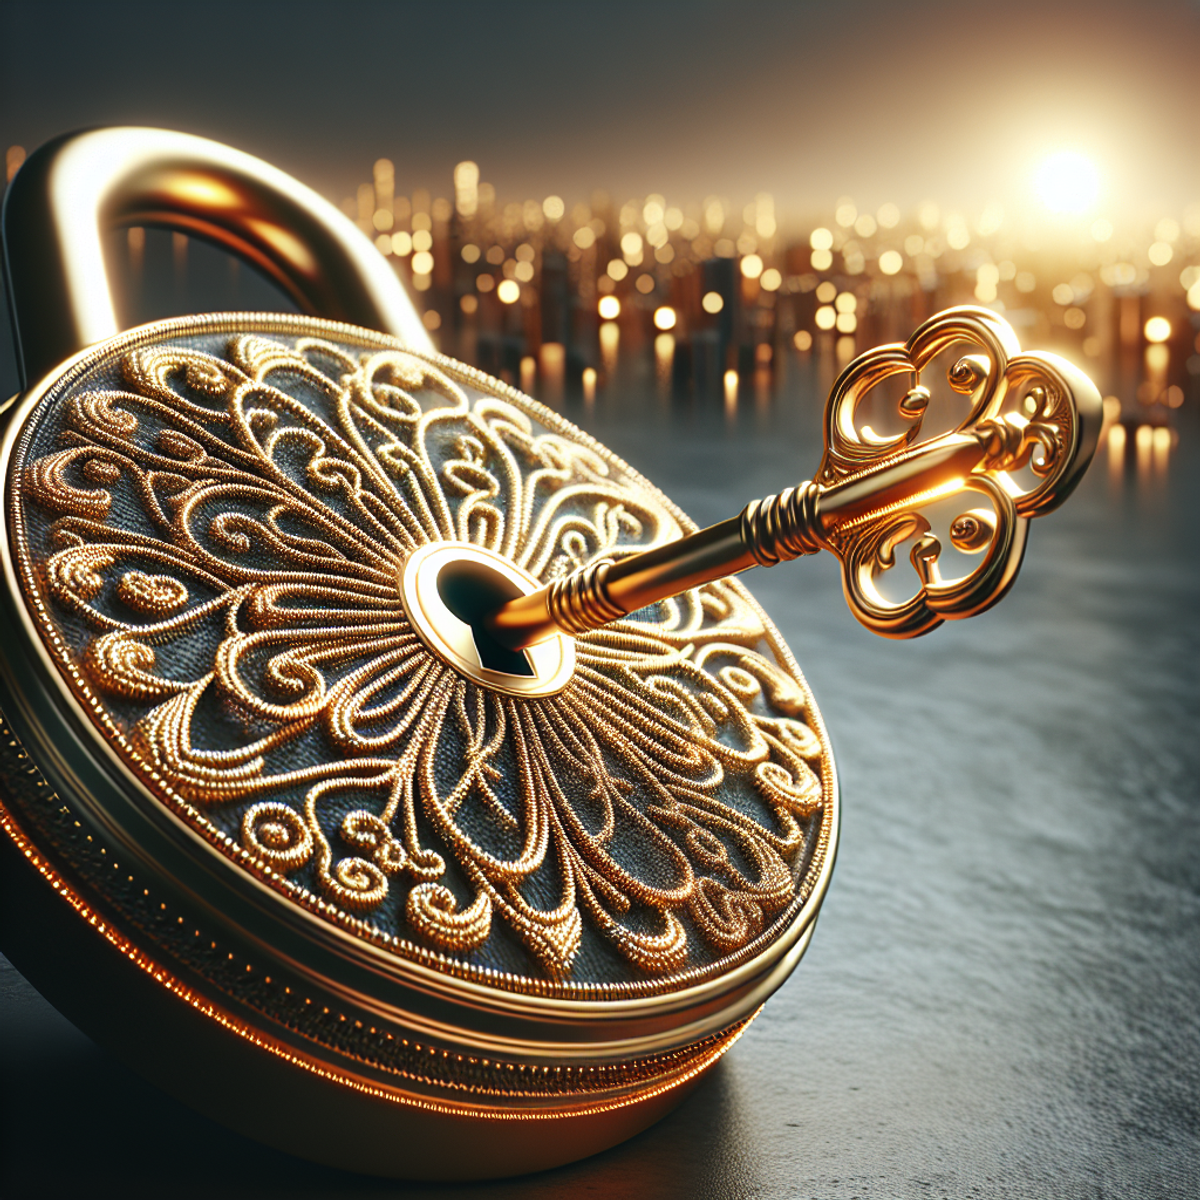 A golden key turning inside a lock with a background hinting at a brighter, more prosperous future.